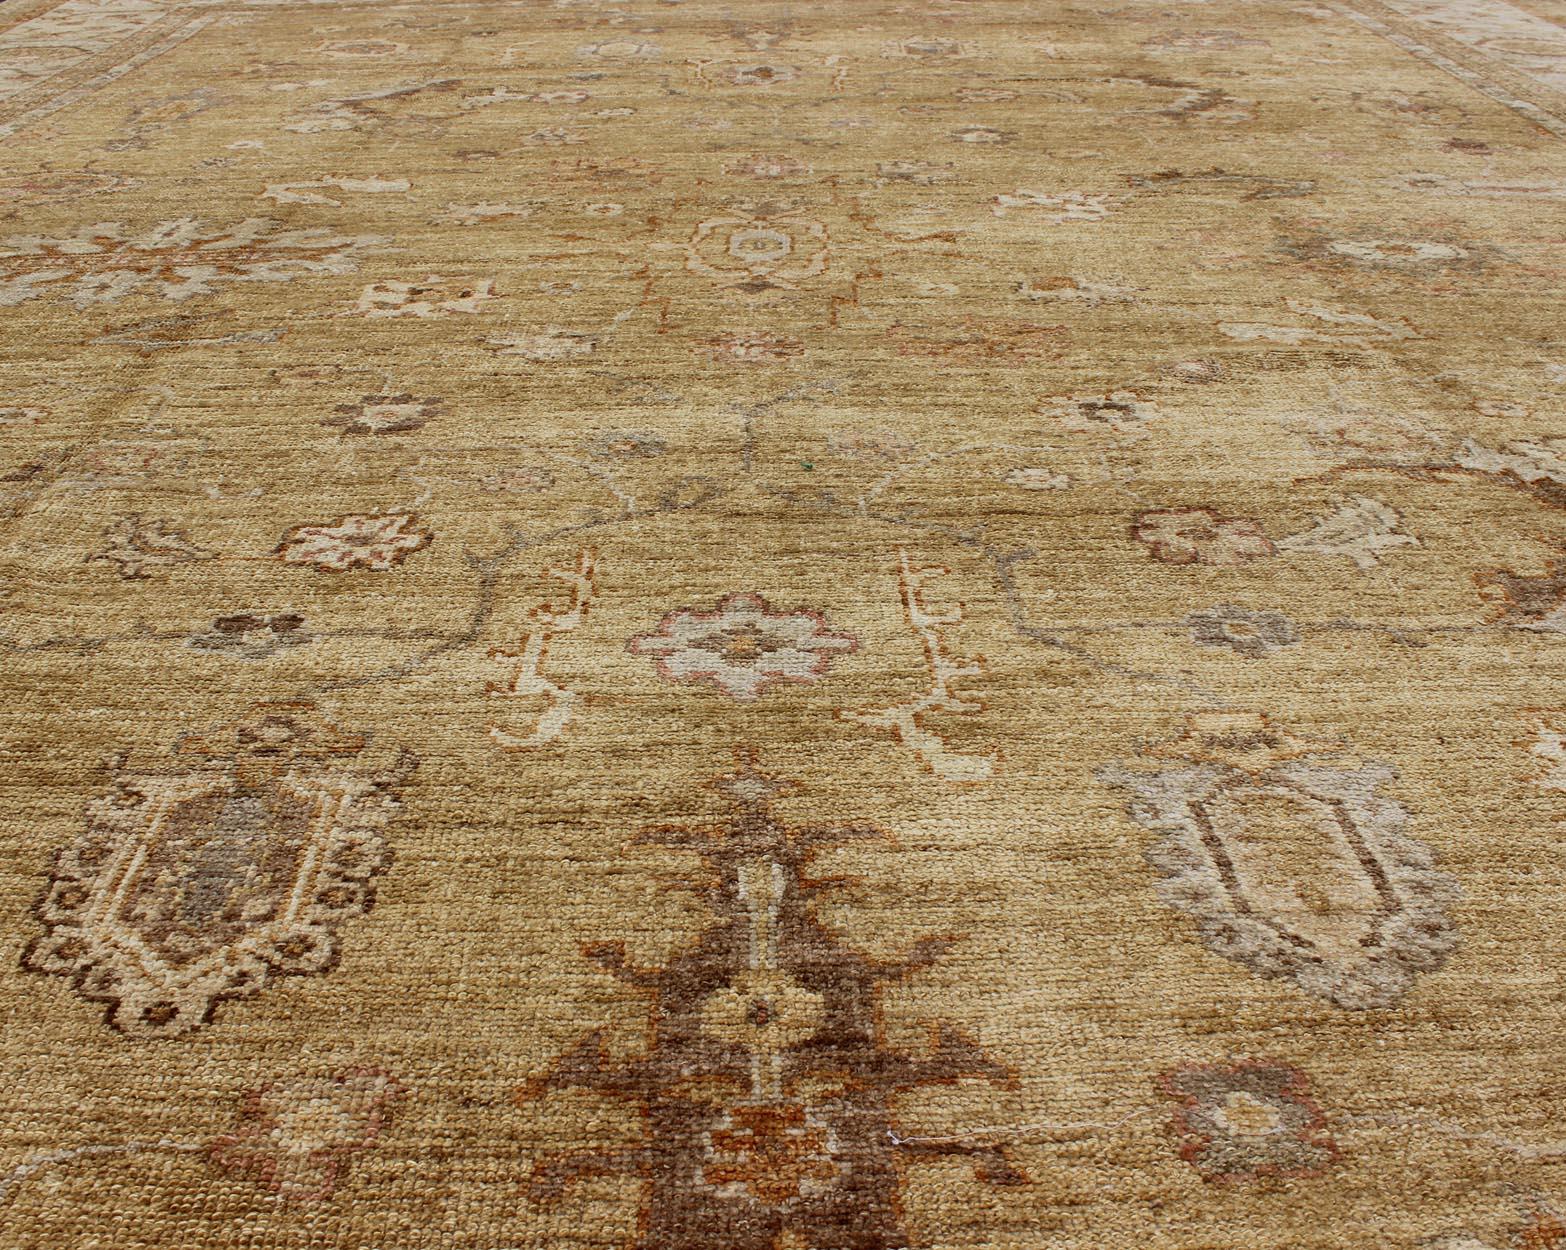 Wool Large Angora Oushak Turkish Rug in Warm Colors of Taupe, Soft Gold, Brown, Cream For Sale